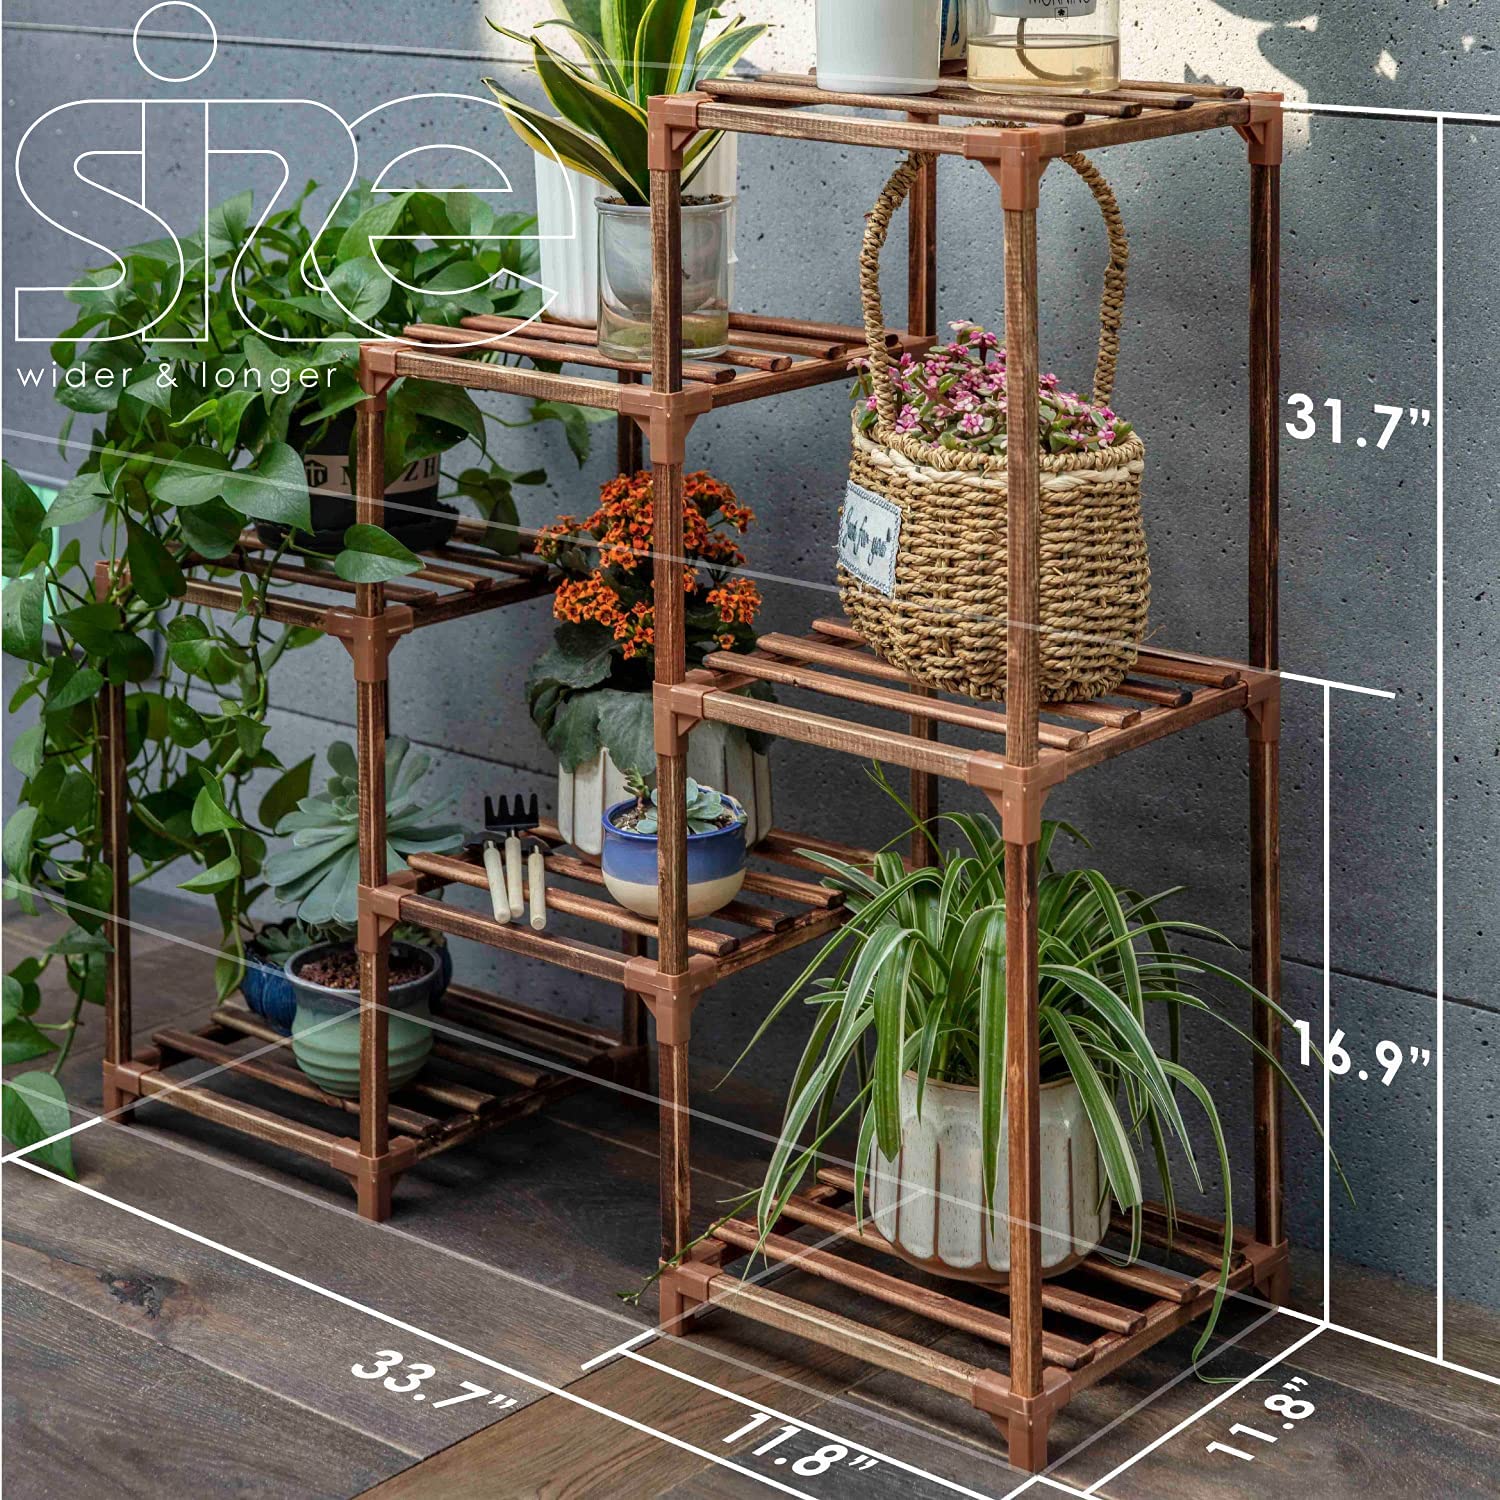 7-Pot Eco-Friendly Wooden Plant Stand - Sturdy Indoor & Outdoor Display